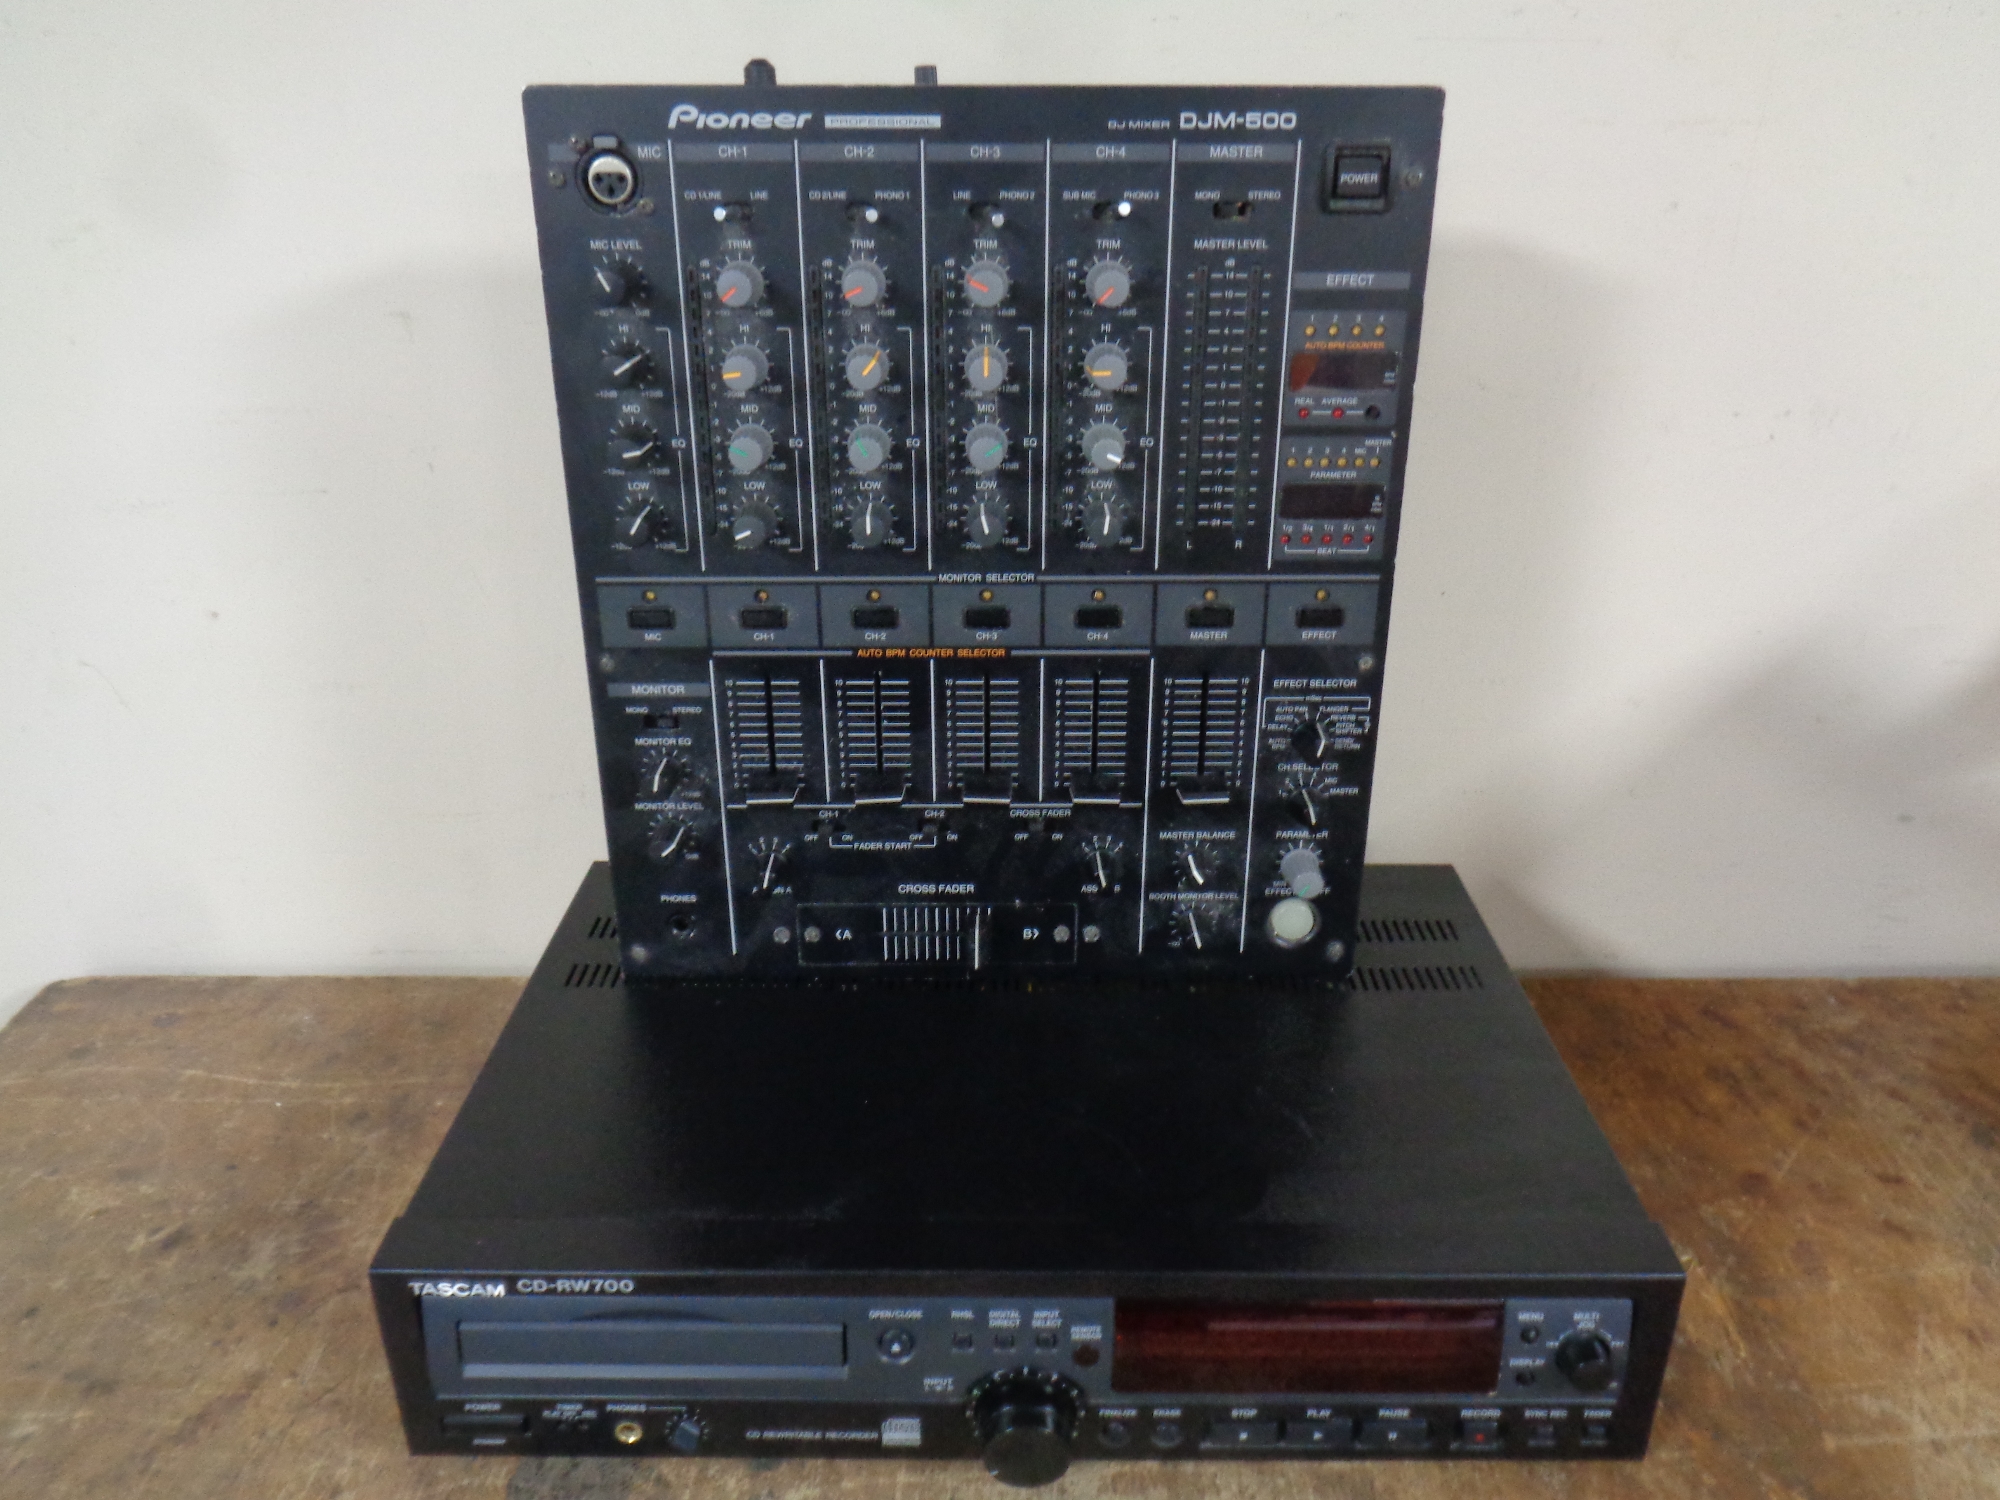 A Pioneer DGM-500 DJ mixer together with a Tascam CD RW700 CD re-writeable recorder